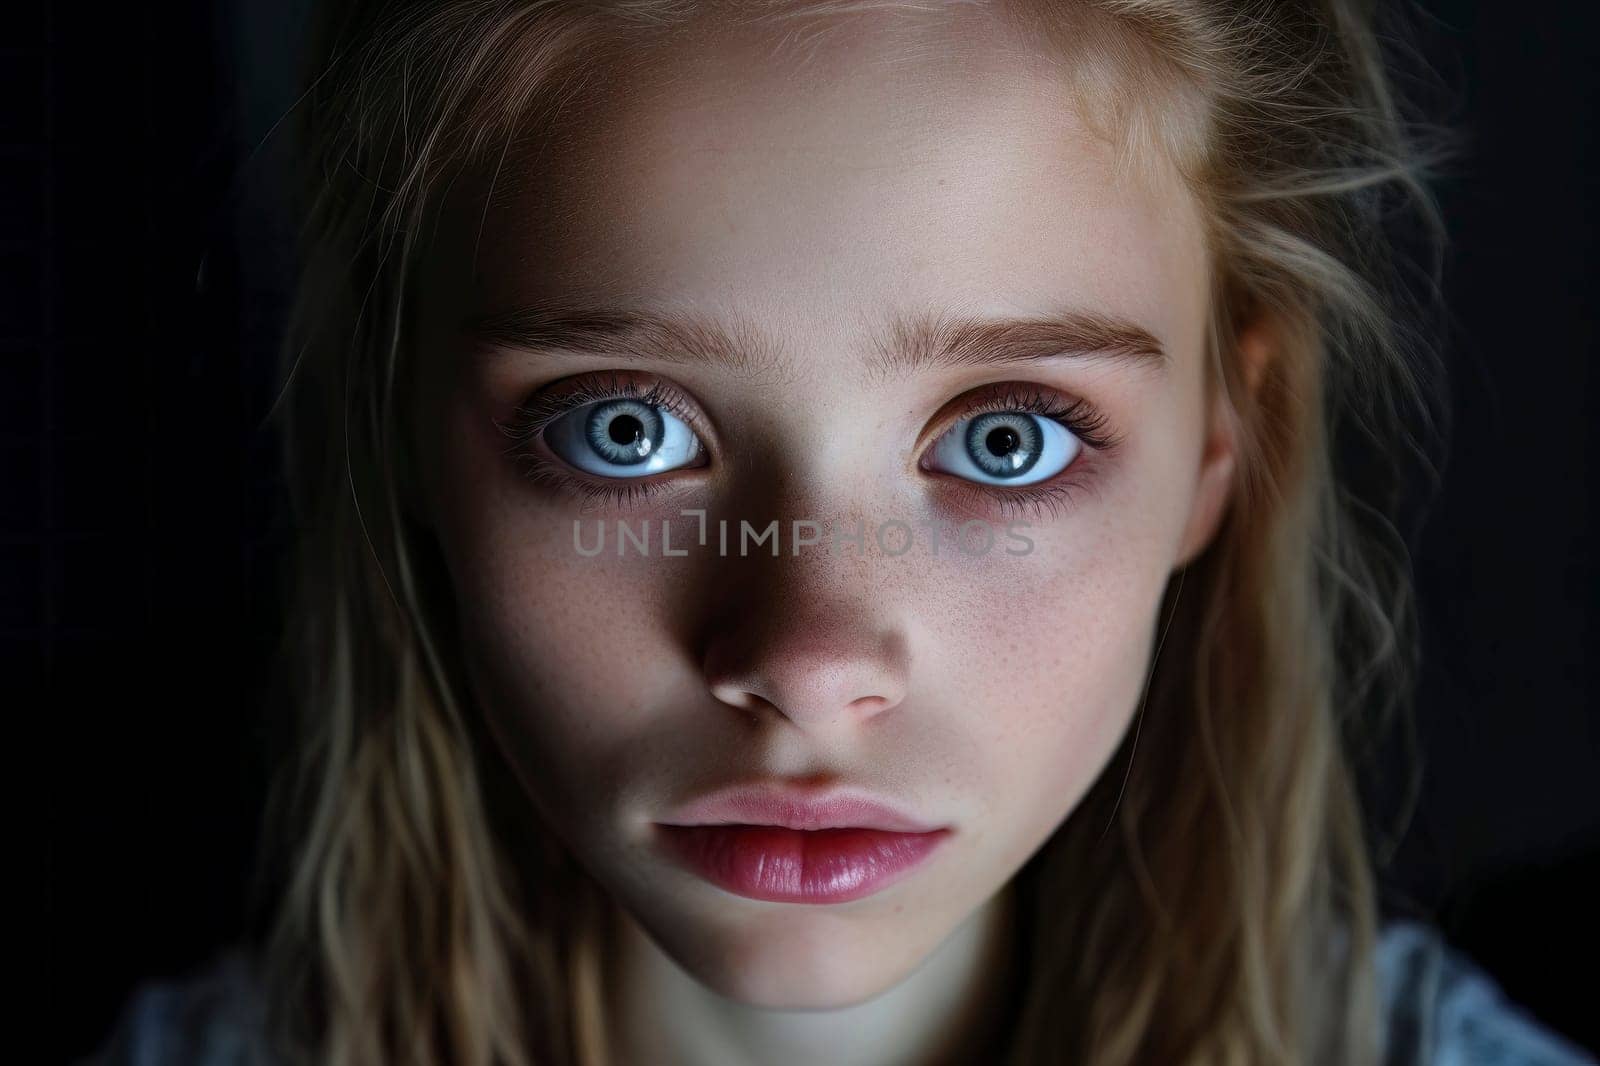 A captivating close-up portrait of a young girl with wide-open eyes.